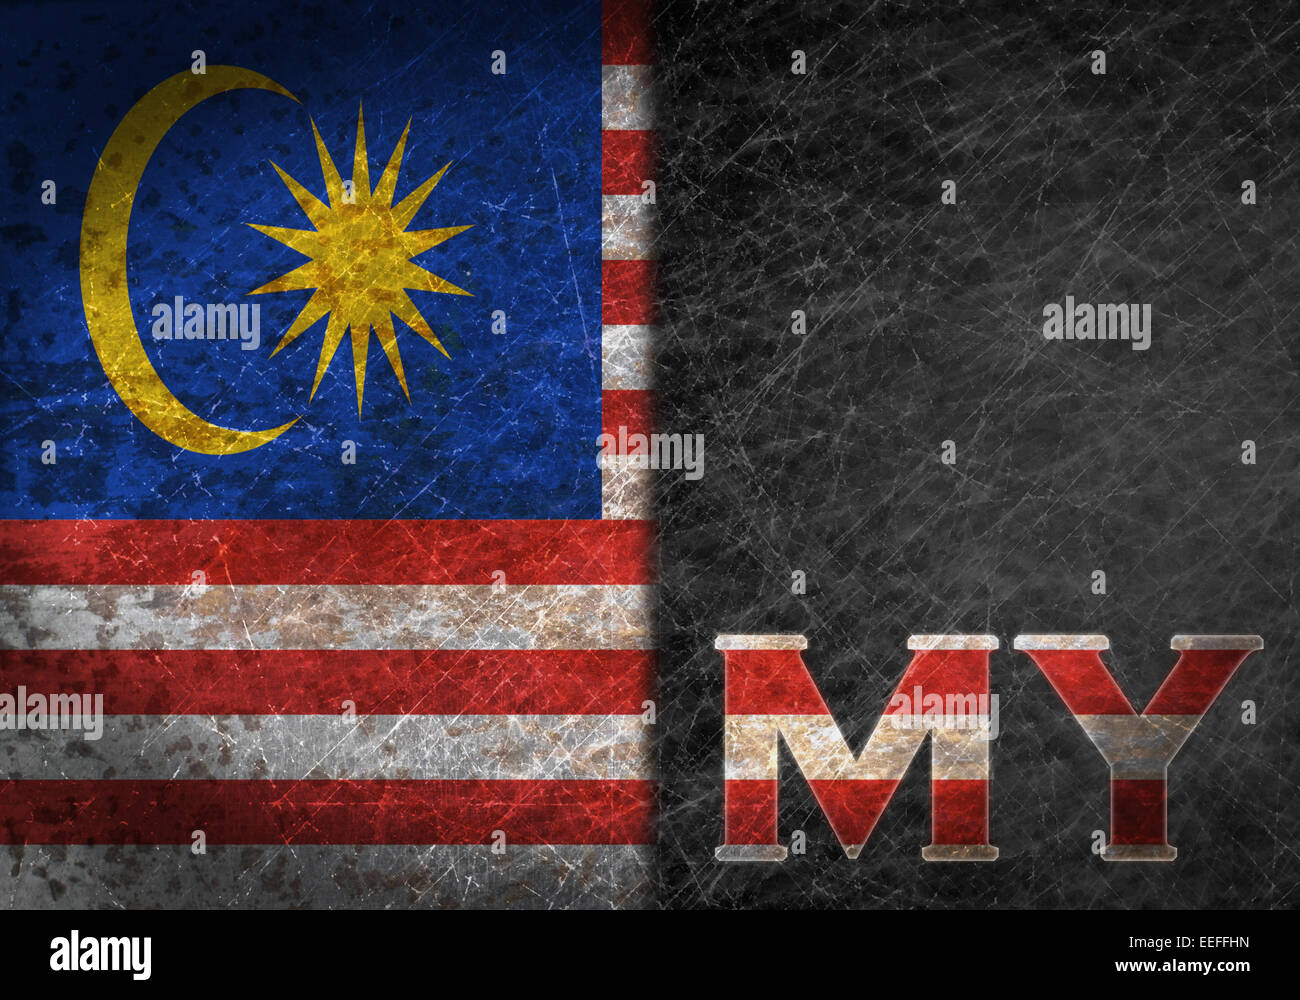 Old rusty metal sign with a flag and country abbreviation - Malaysia Stock Photo